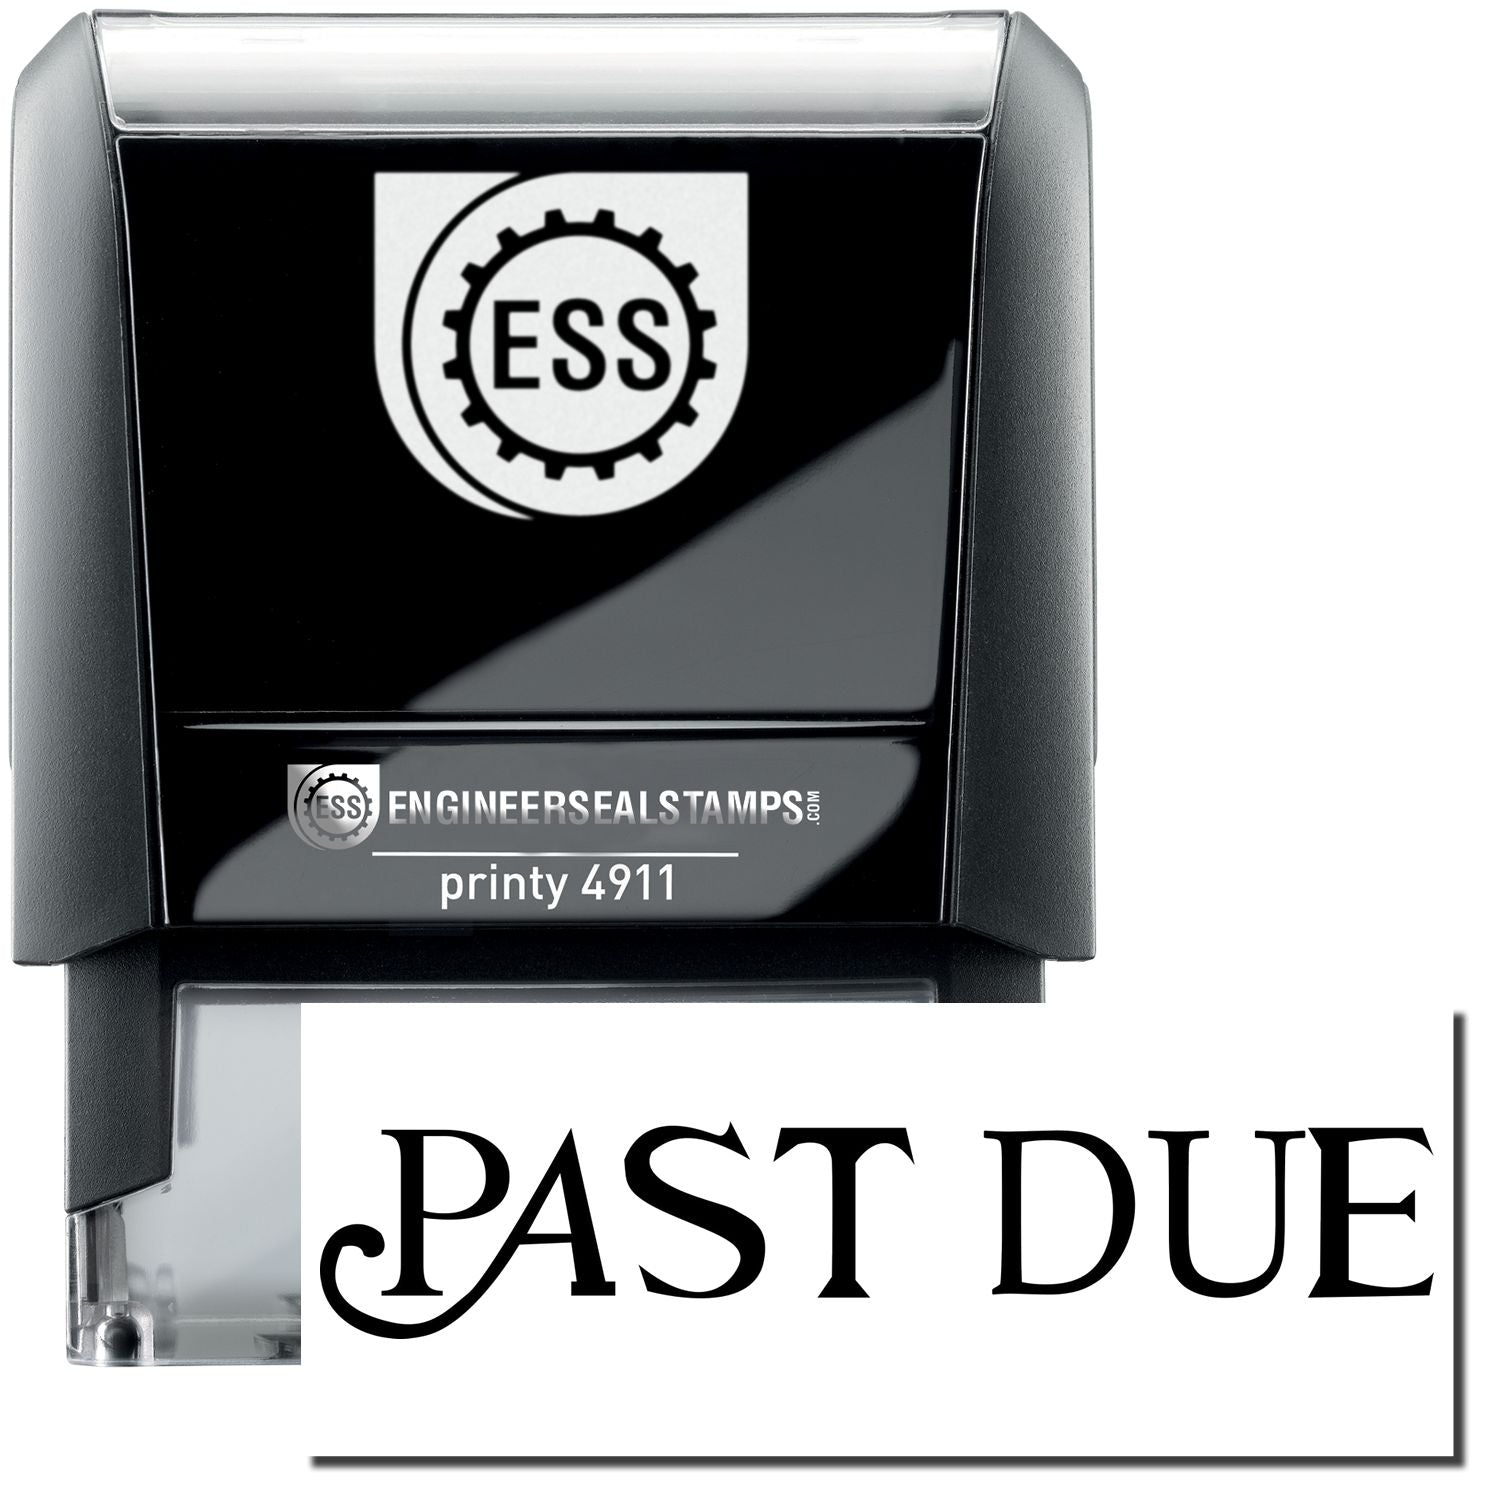 A self-inking stamp with a stamped image showing how the text "PAST DUE" in a curley font is displayed after stamping.